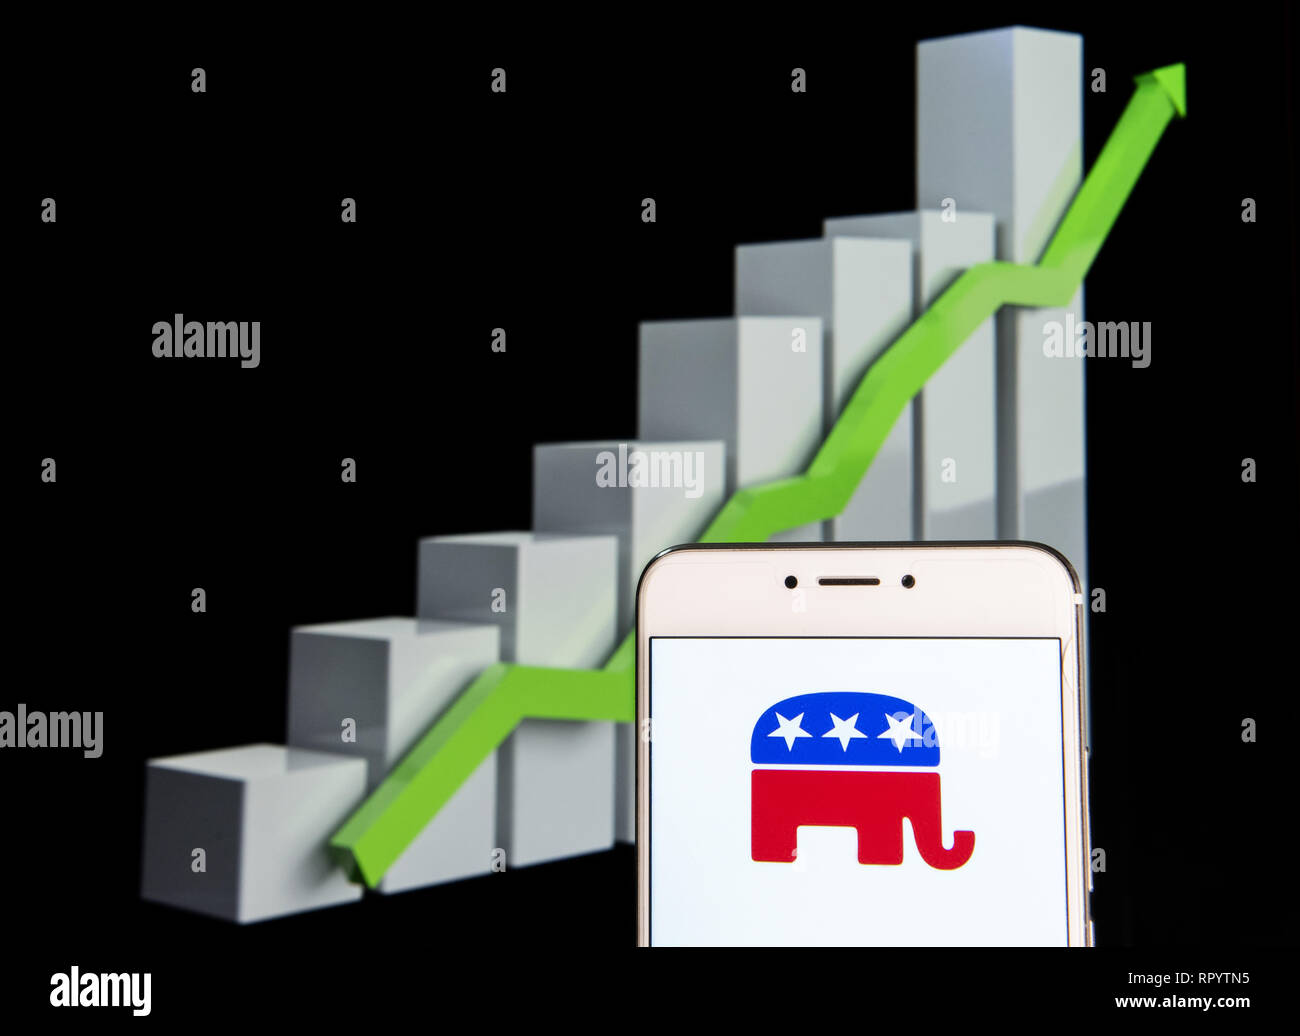 February 11, 2019 - Hong Kong - American liberal, progressive and left-wing democratic Party icon is seen on an android mobile device with an ascent growth chart in the background. (Credit Image: © Miguel Candela/SOPA Images via ZUMA Wire) Stock Photo